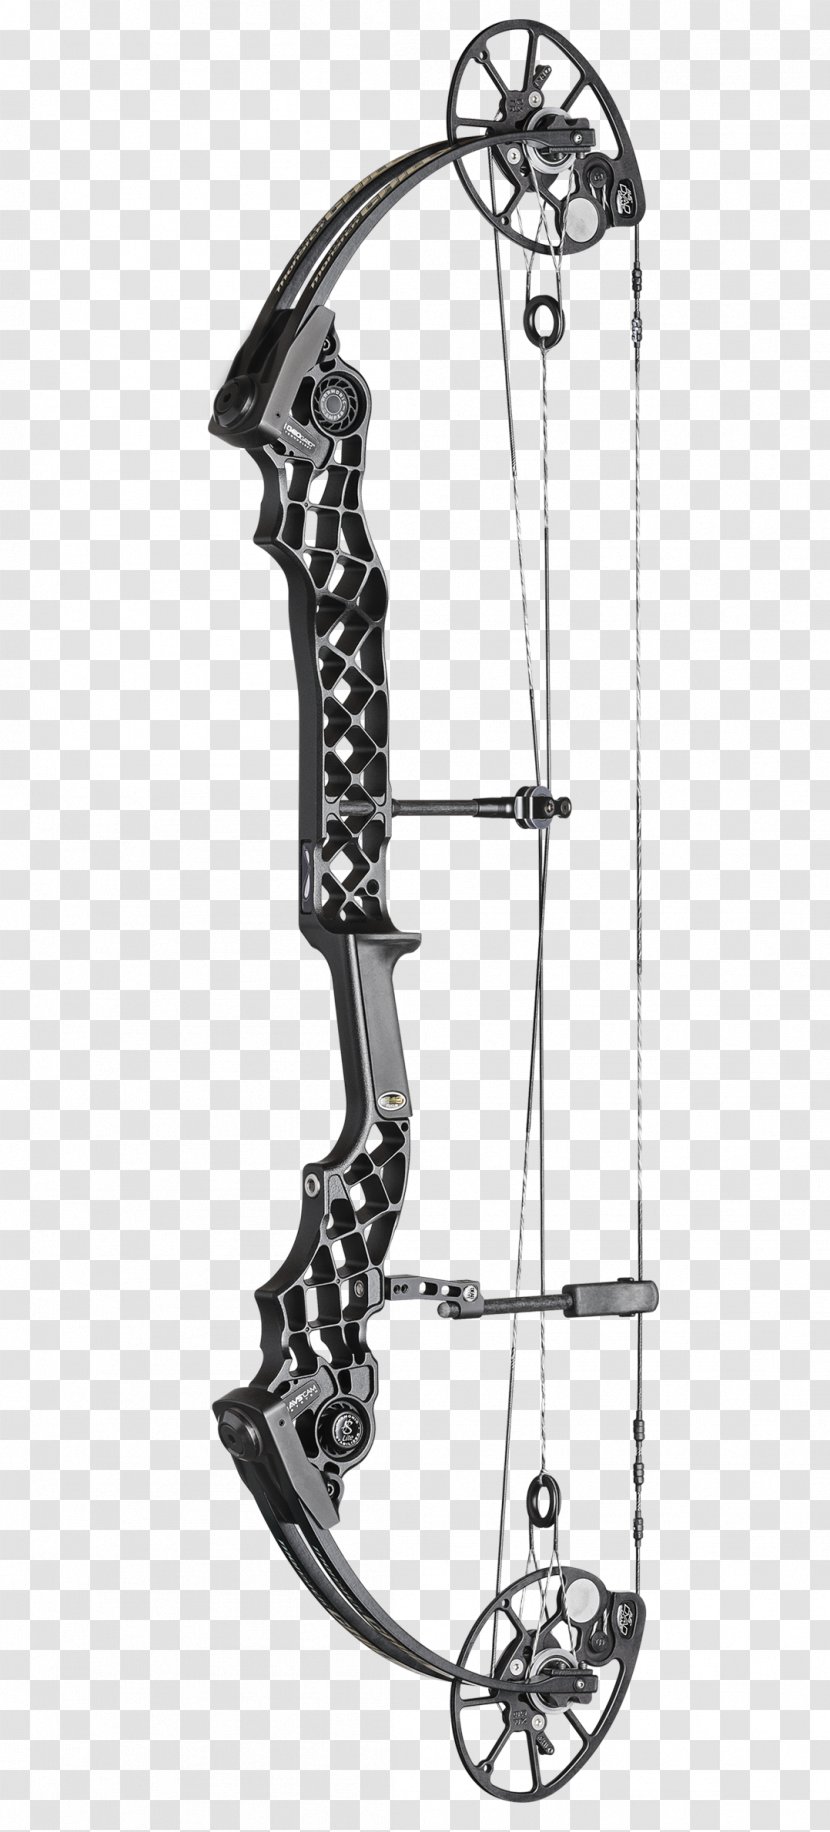 Compound Bows Bow And Arrow Archery Bowhunting - Ranged Weapon - Samick Equipment Transparent PNG